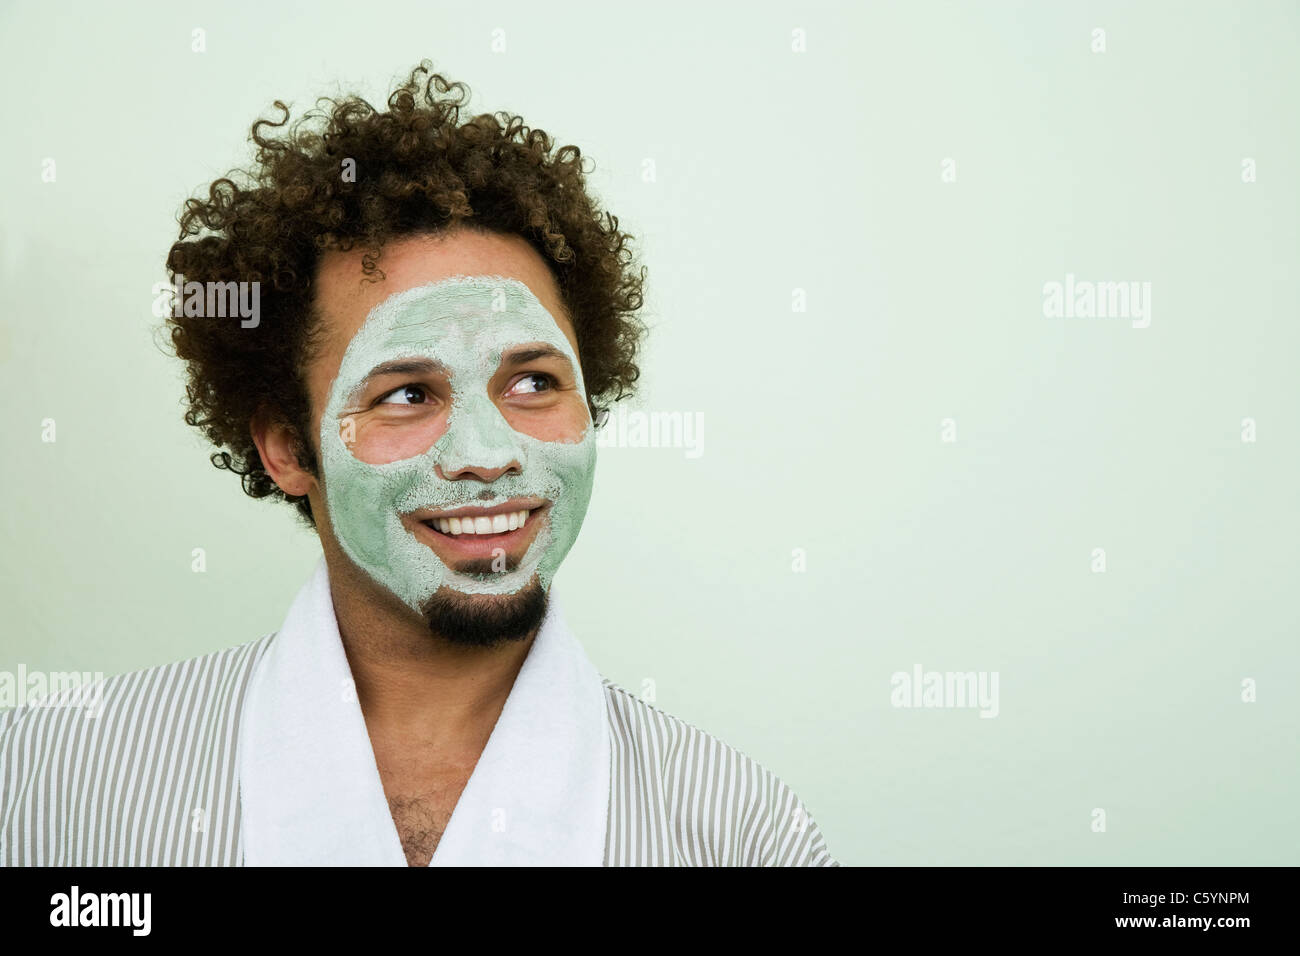 USA, California, Oakland, portrait of smiling man with facial mask Stock Photo